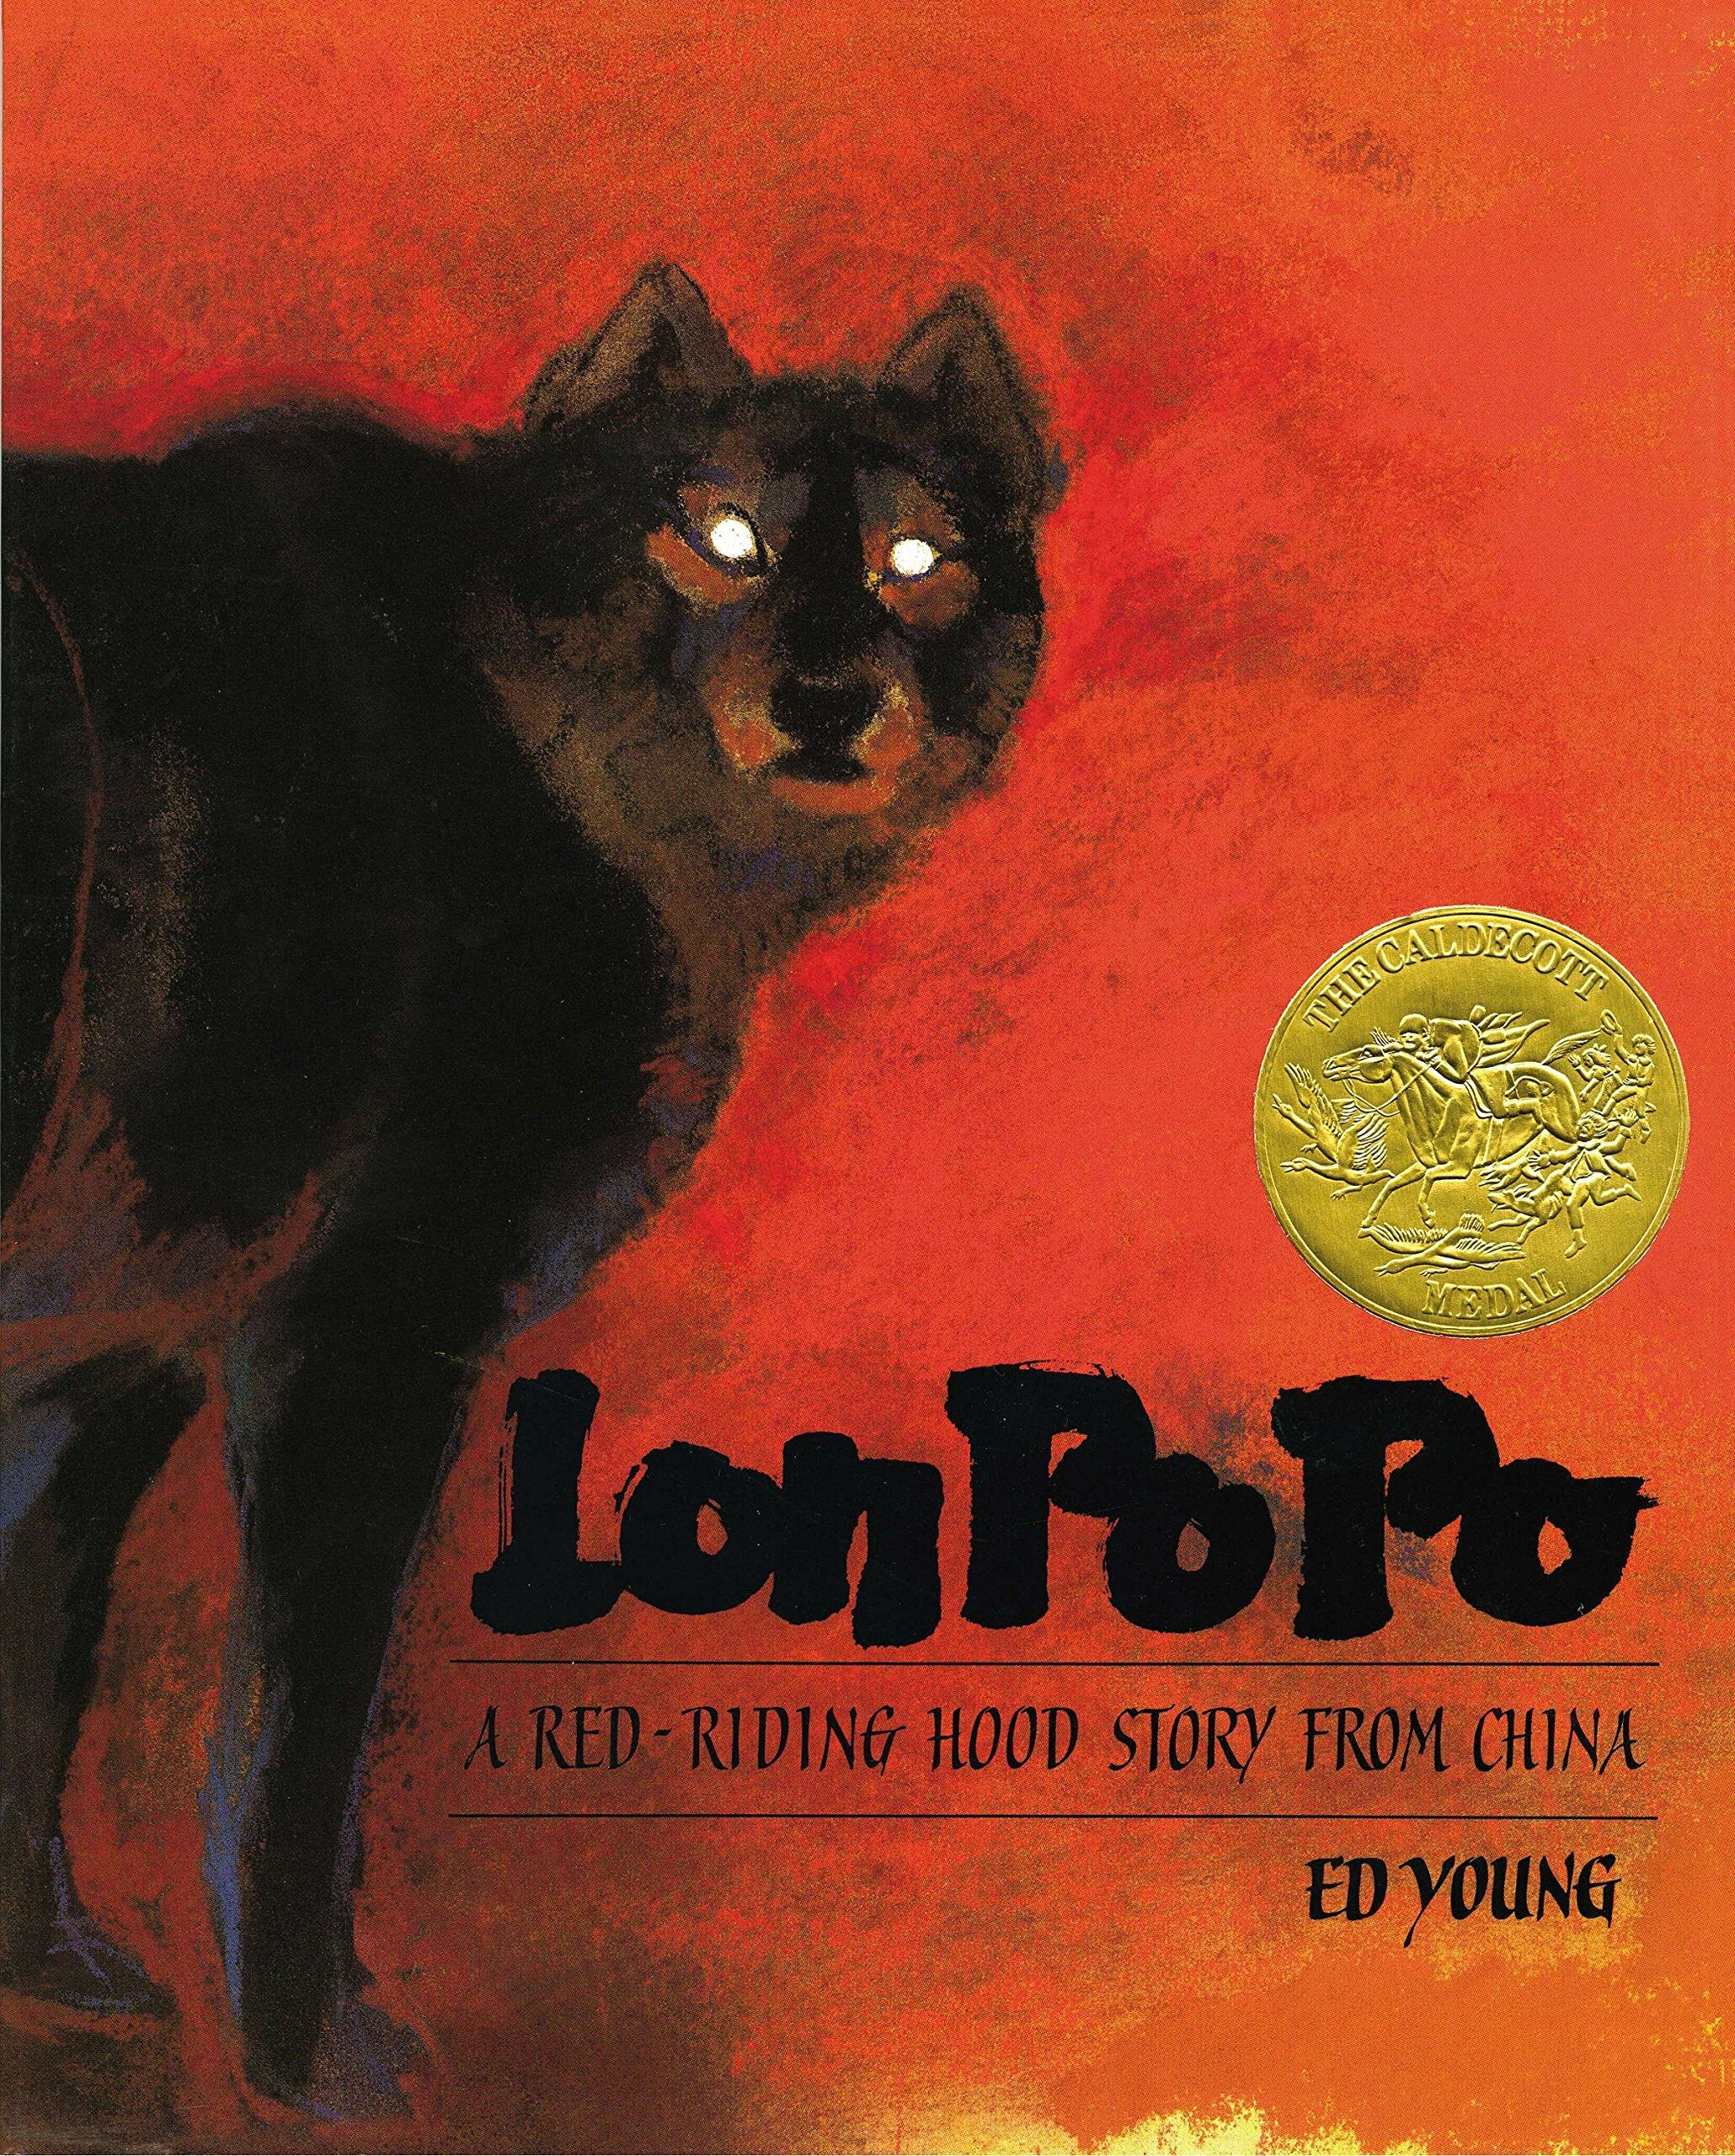 Lon Po Po: A Red-Riding Hood Story from China (Hardcover)